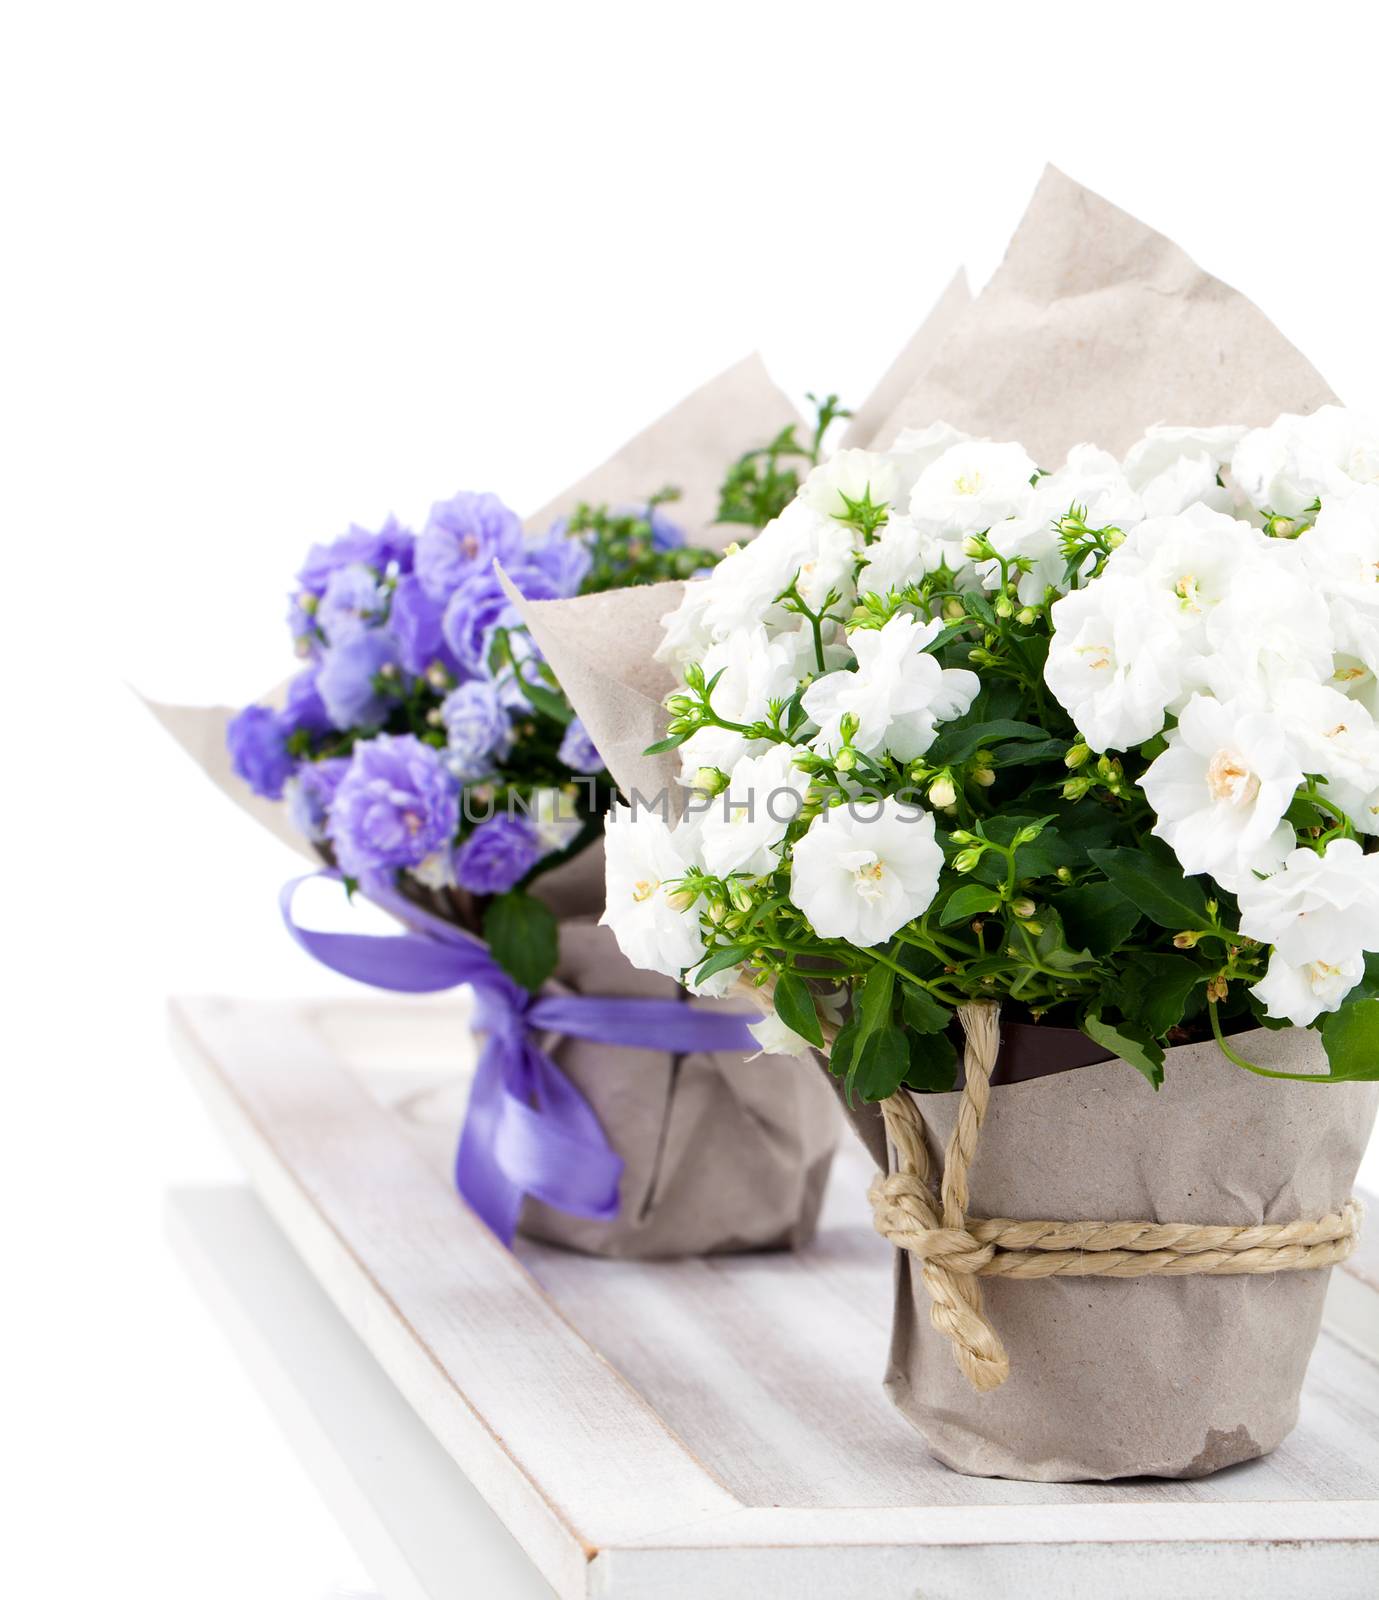 Campanula terry with blue and white flowers in paper packaging, isolated on white background